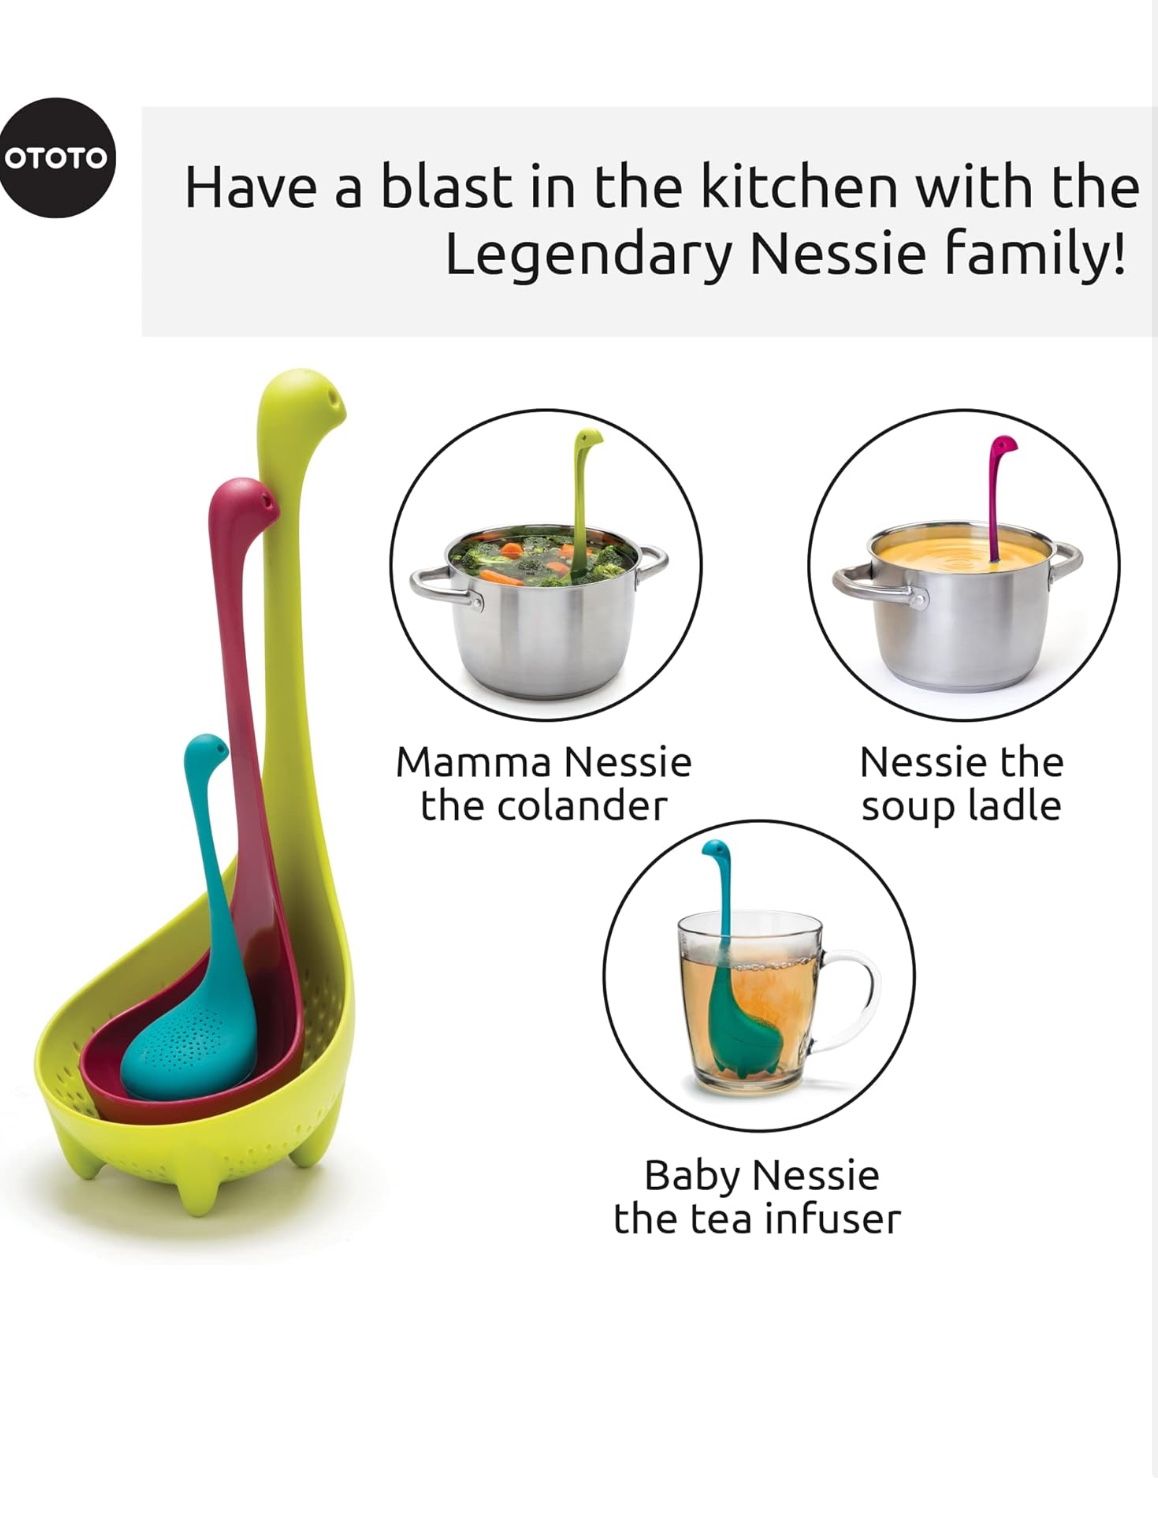 OTOTO The Nessie Family - Pack of 3 Tea Infuser, Soup Ladle, and Colander